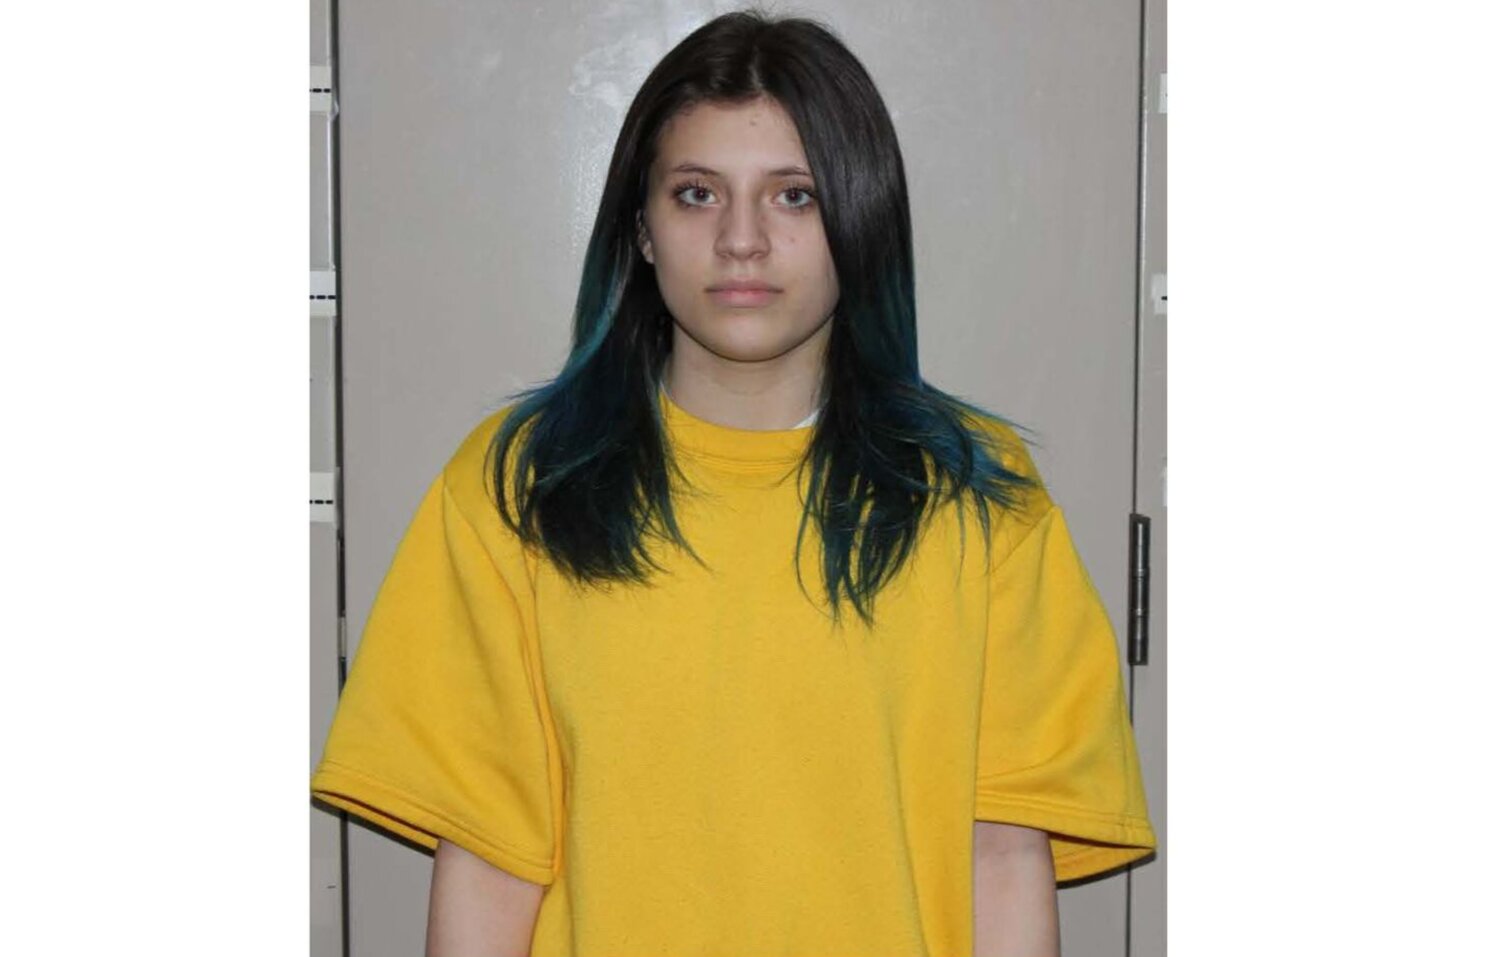 Saphira Orling, 14, was last seen around the 600 block of East Market Street on May 21 around 1:30 p.m. Orling is described as standing 5 foot 1 inches tall and 120 pounds, with brown hair and blue eyes. The APD news release says she may have traveled to the Olympia area.